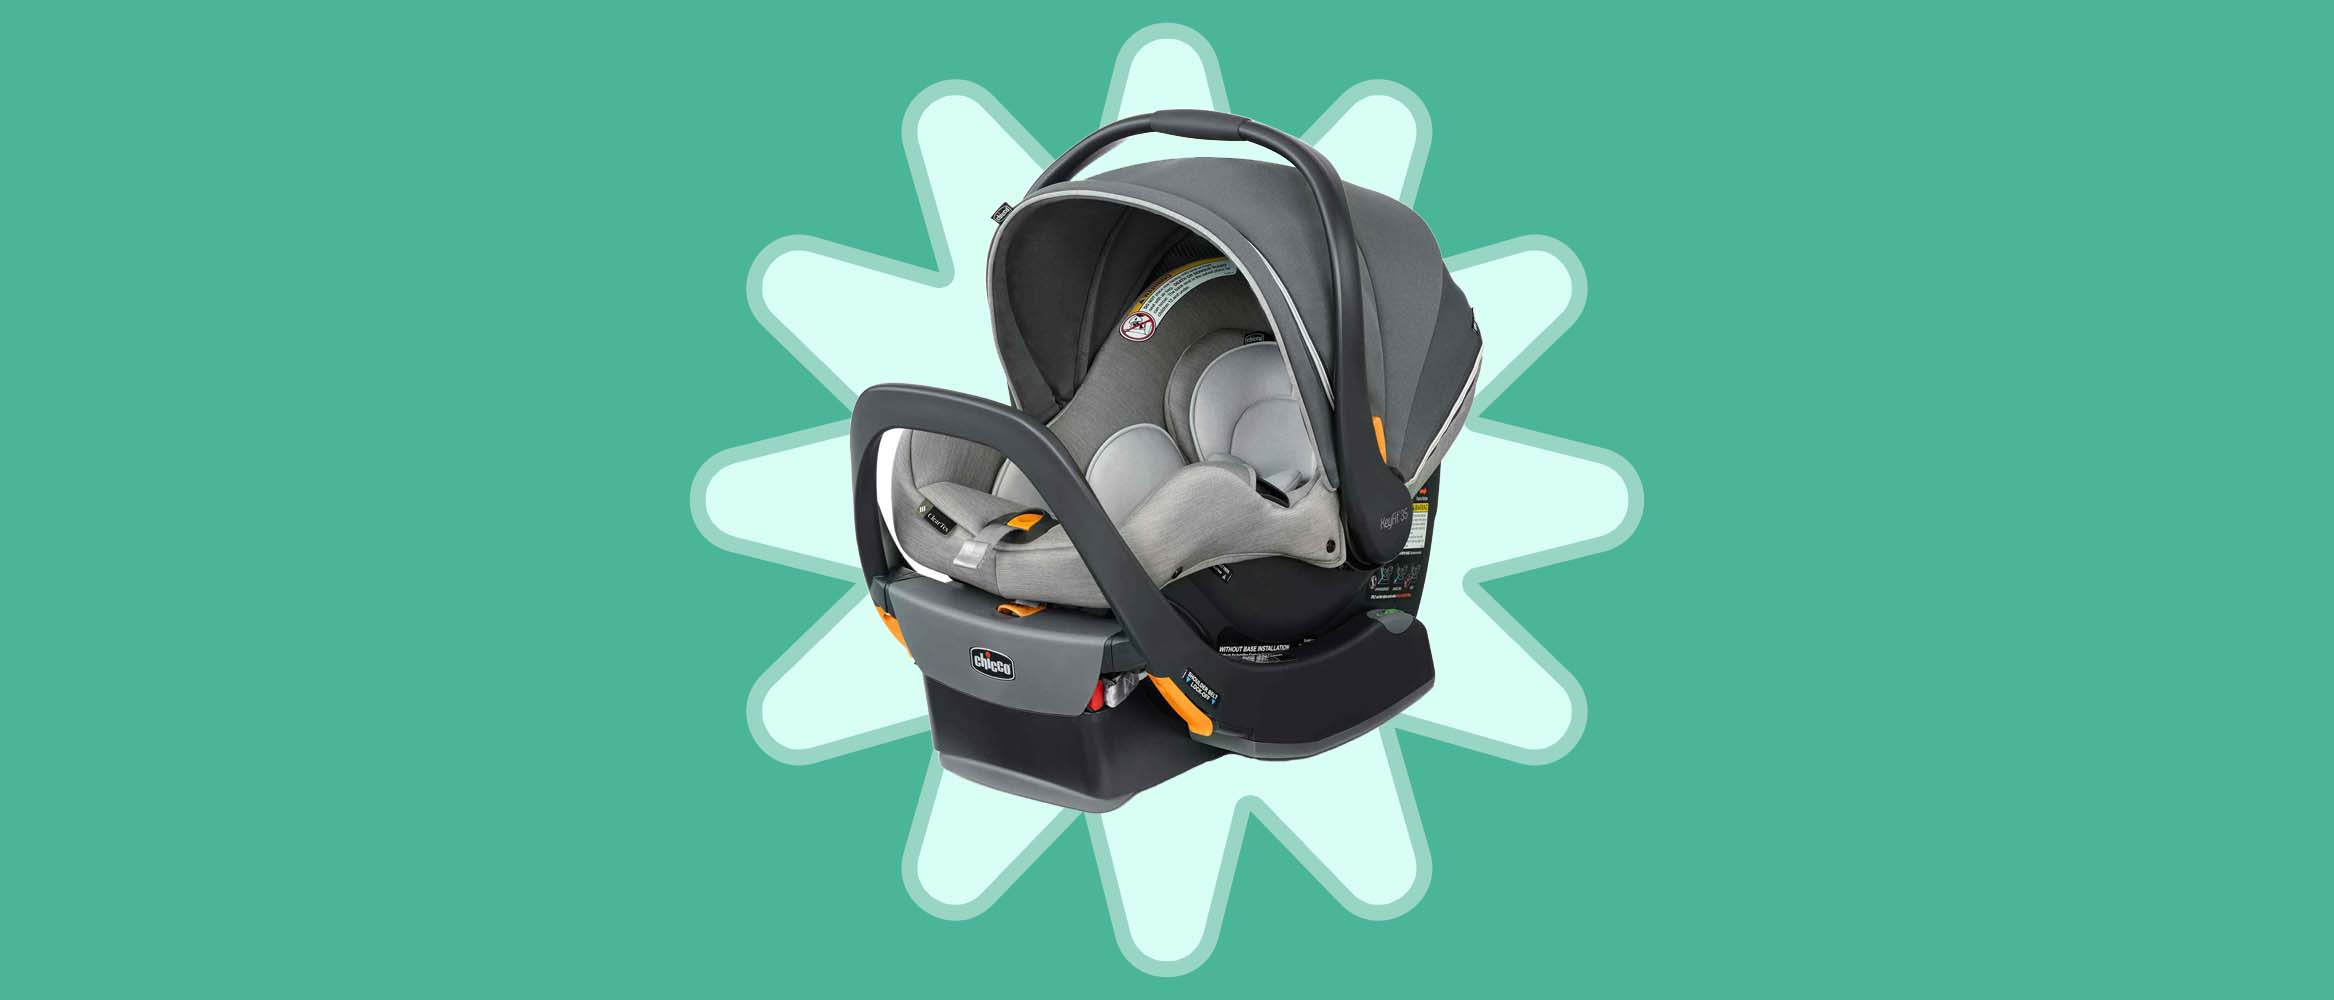 one of the best car seats for babies from KeyFit 35